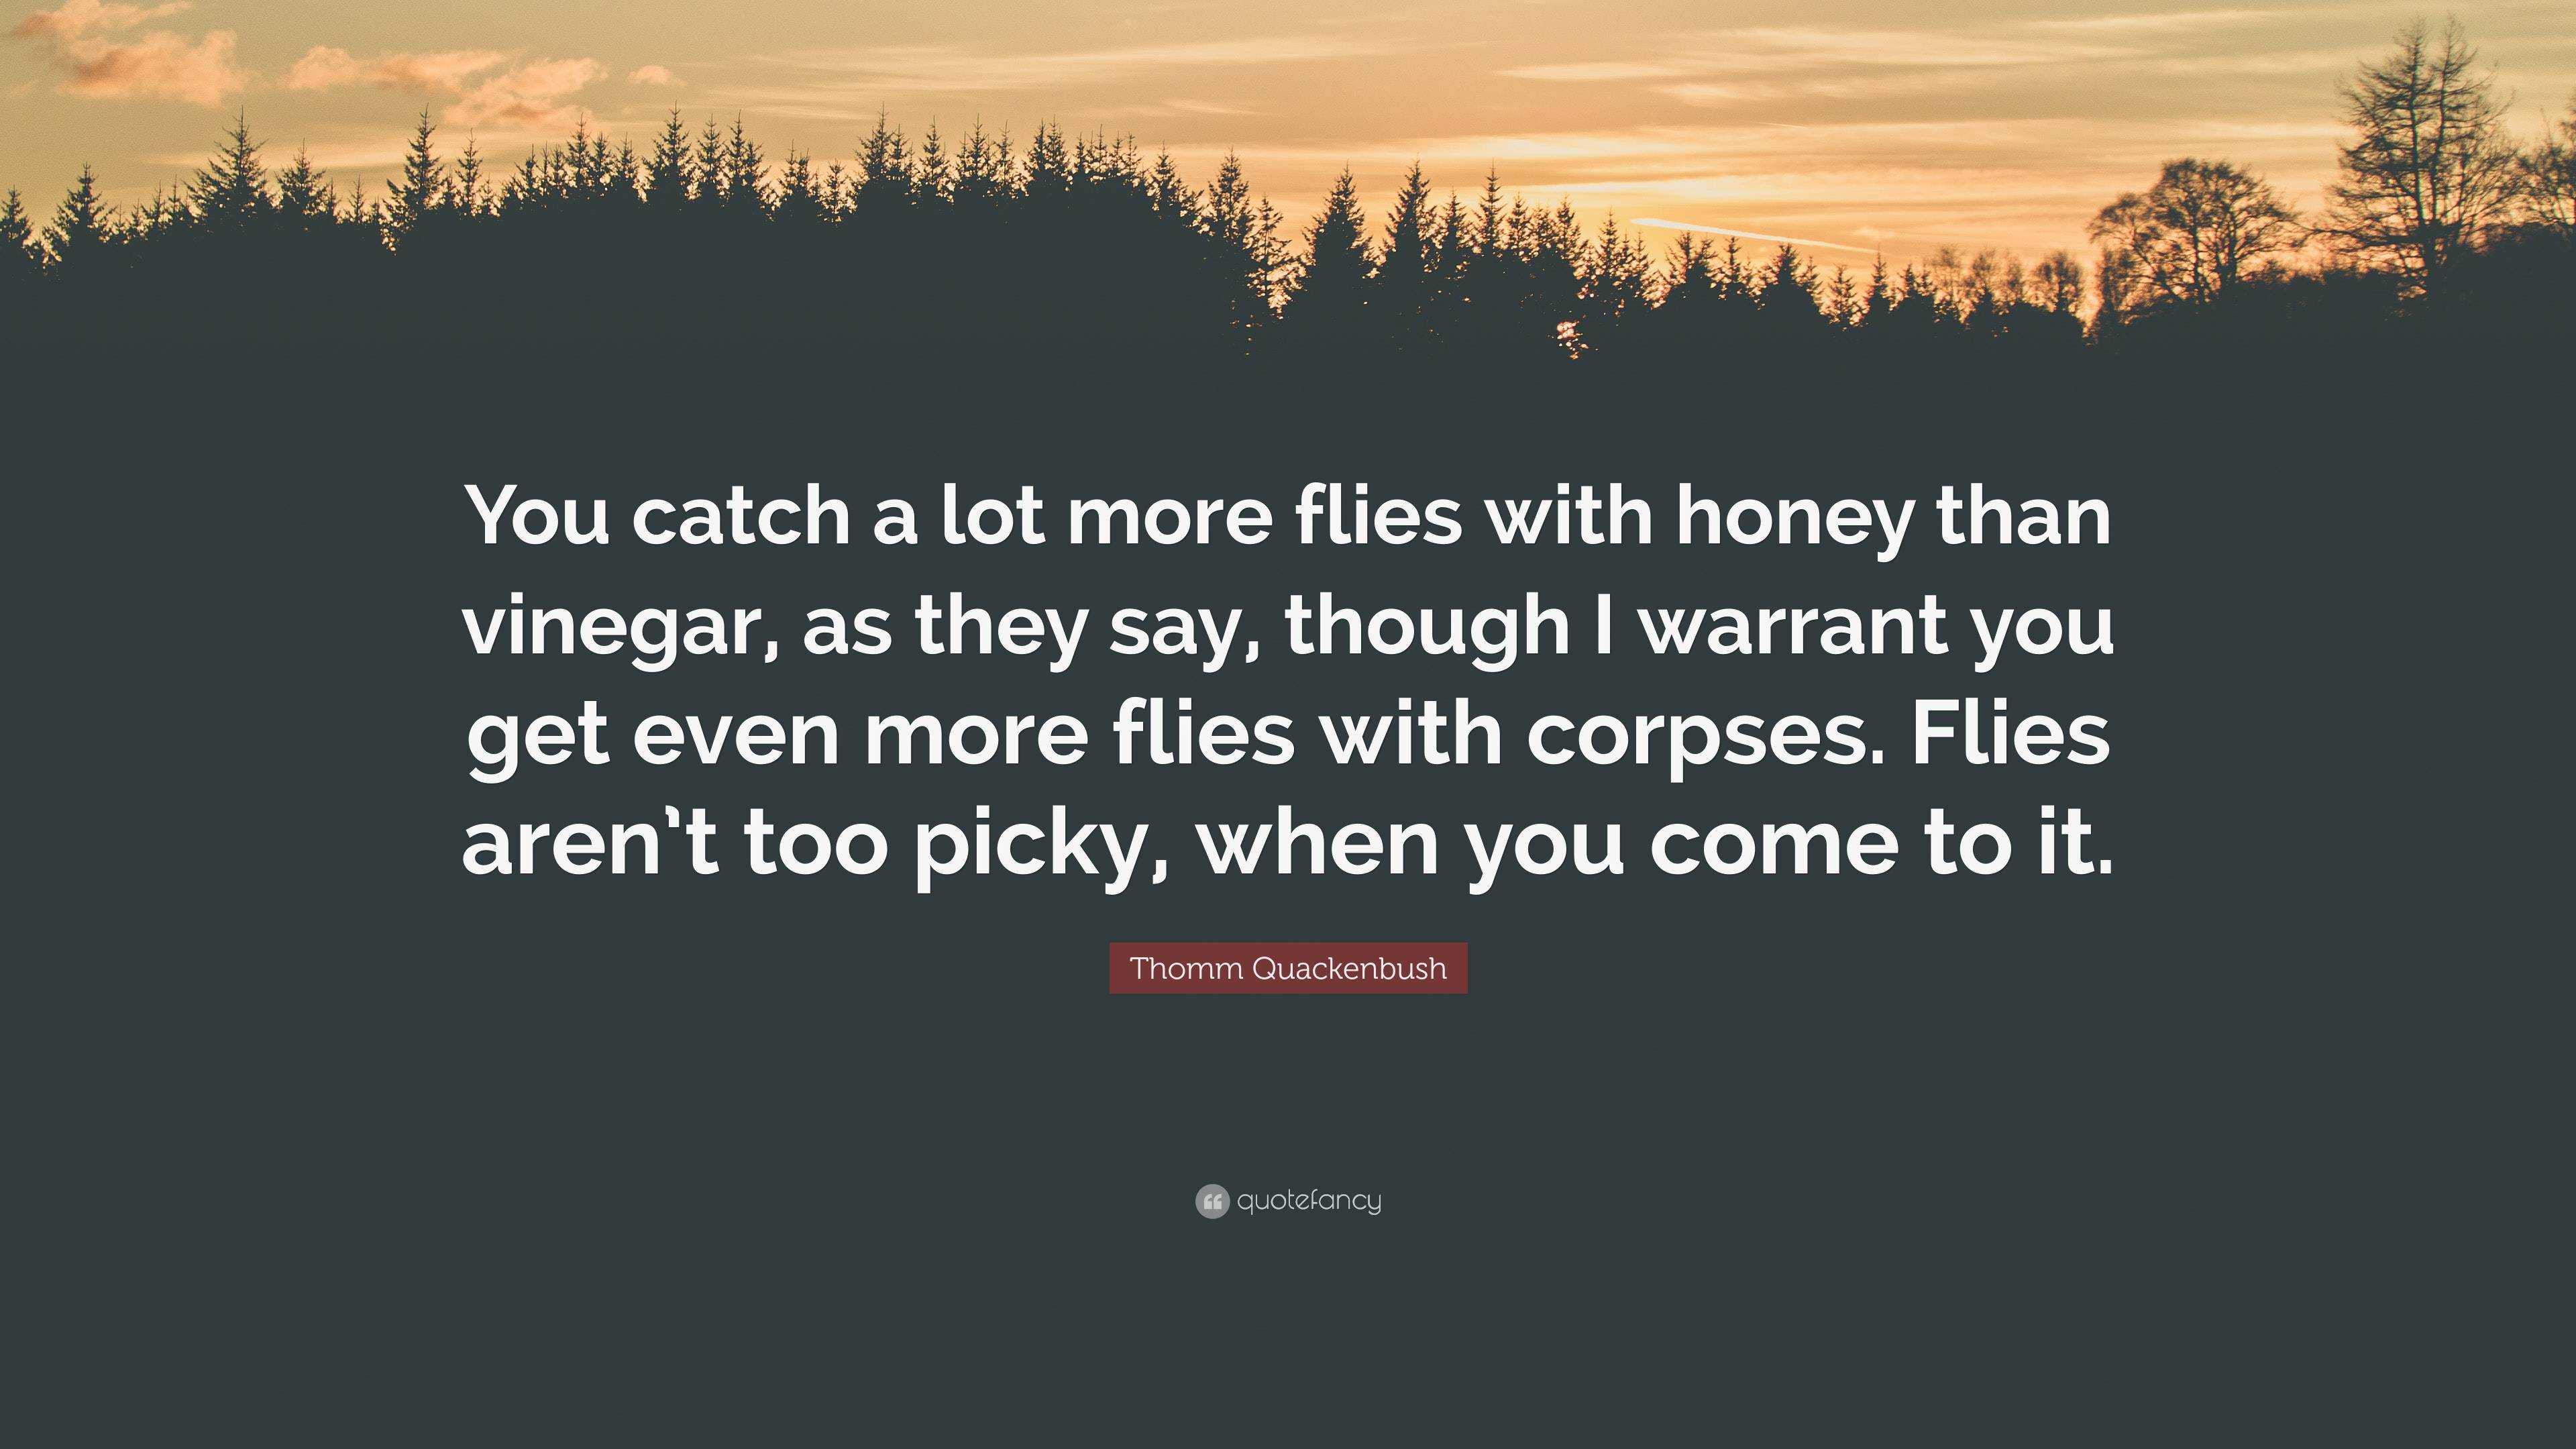 Thomm Quackenbush Quote “you Catch A Lot More Flies With Honey Than Vinegar As They Say